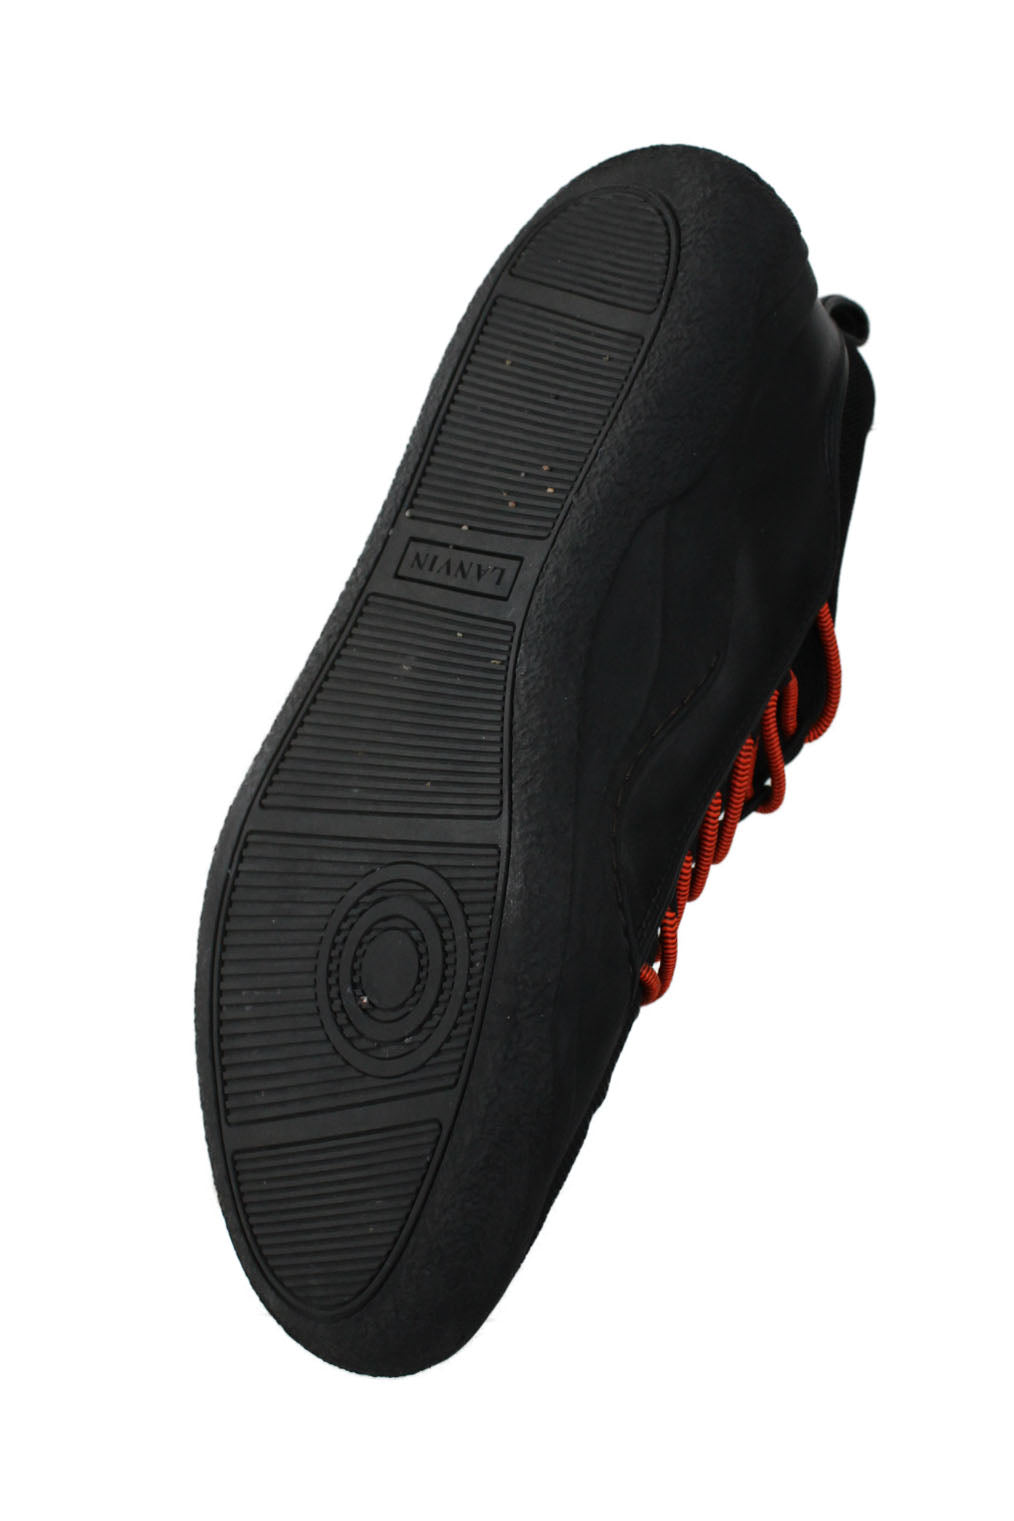 underside view with 'lanvin' logo at soles tread.